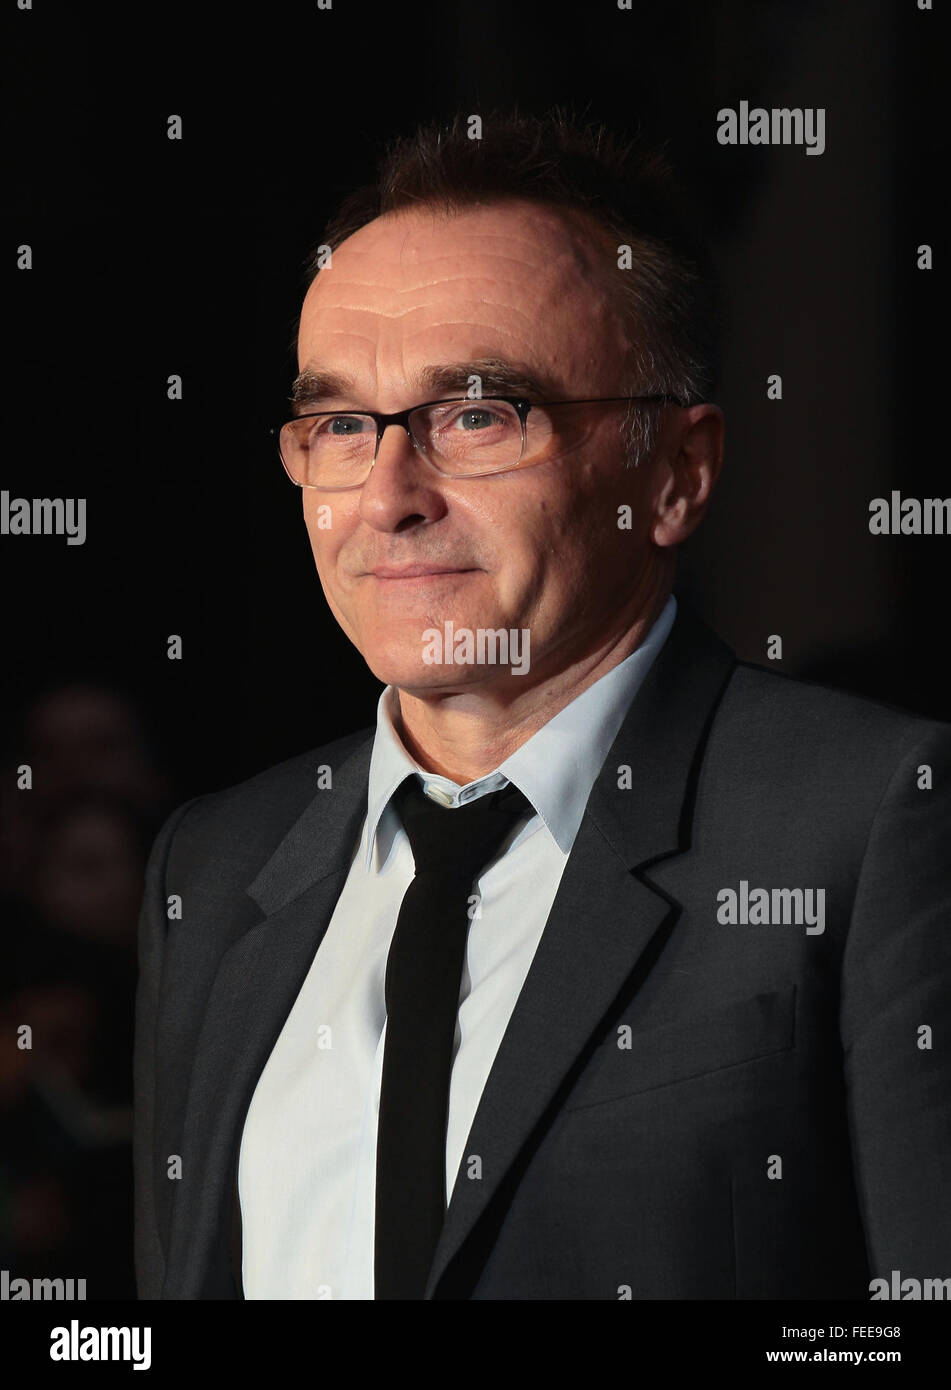 London, UK, 18th Oct 2015: Danny Boyle attends the Steve Jobs premiere and closing night gala, 59th BFI London Film Festival at Stock Photo